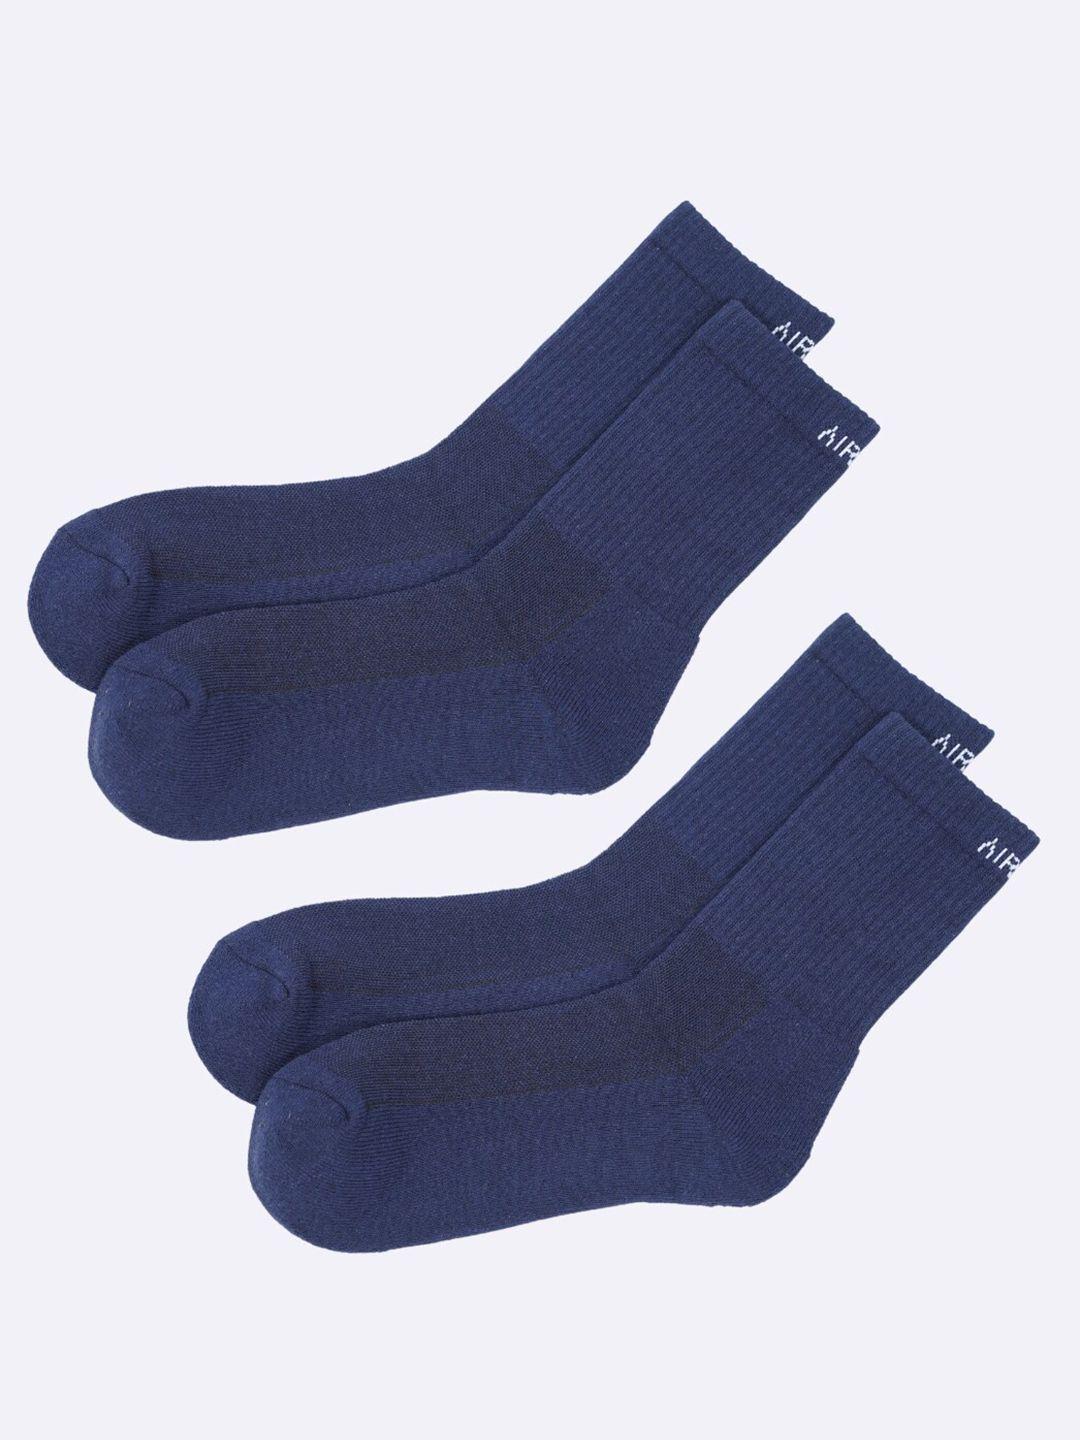 air-garb-unisex-pack-of-2-breathable-cushioned-crew-calf-length-socks